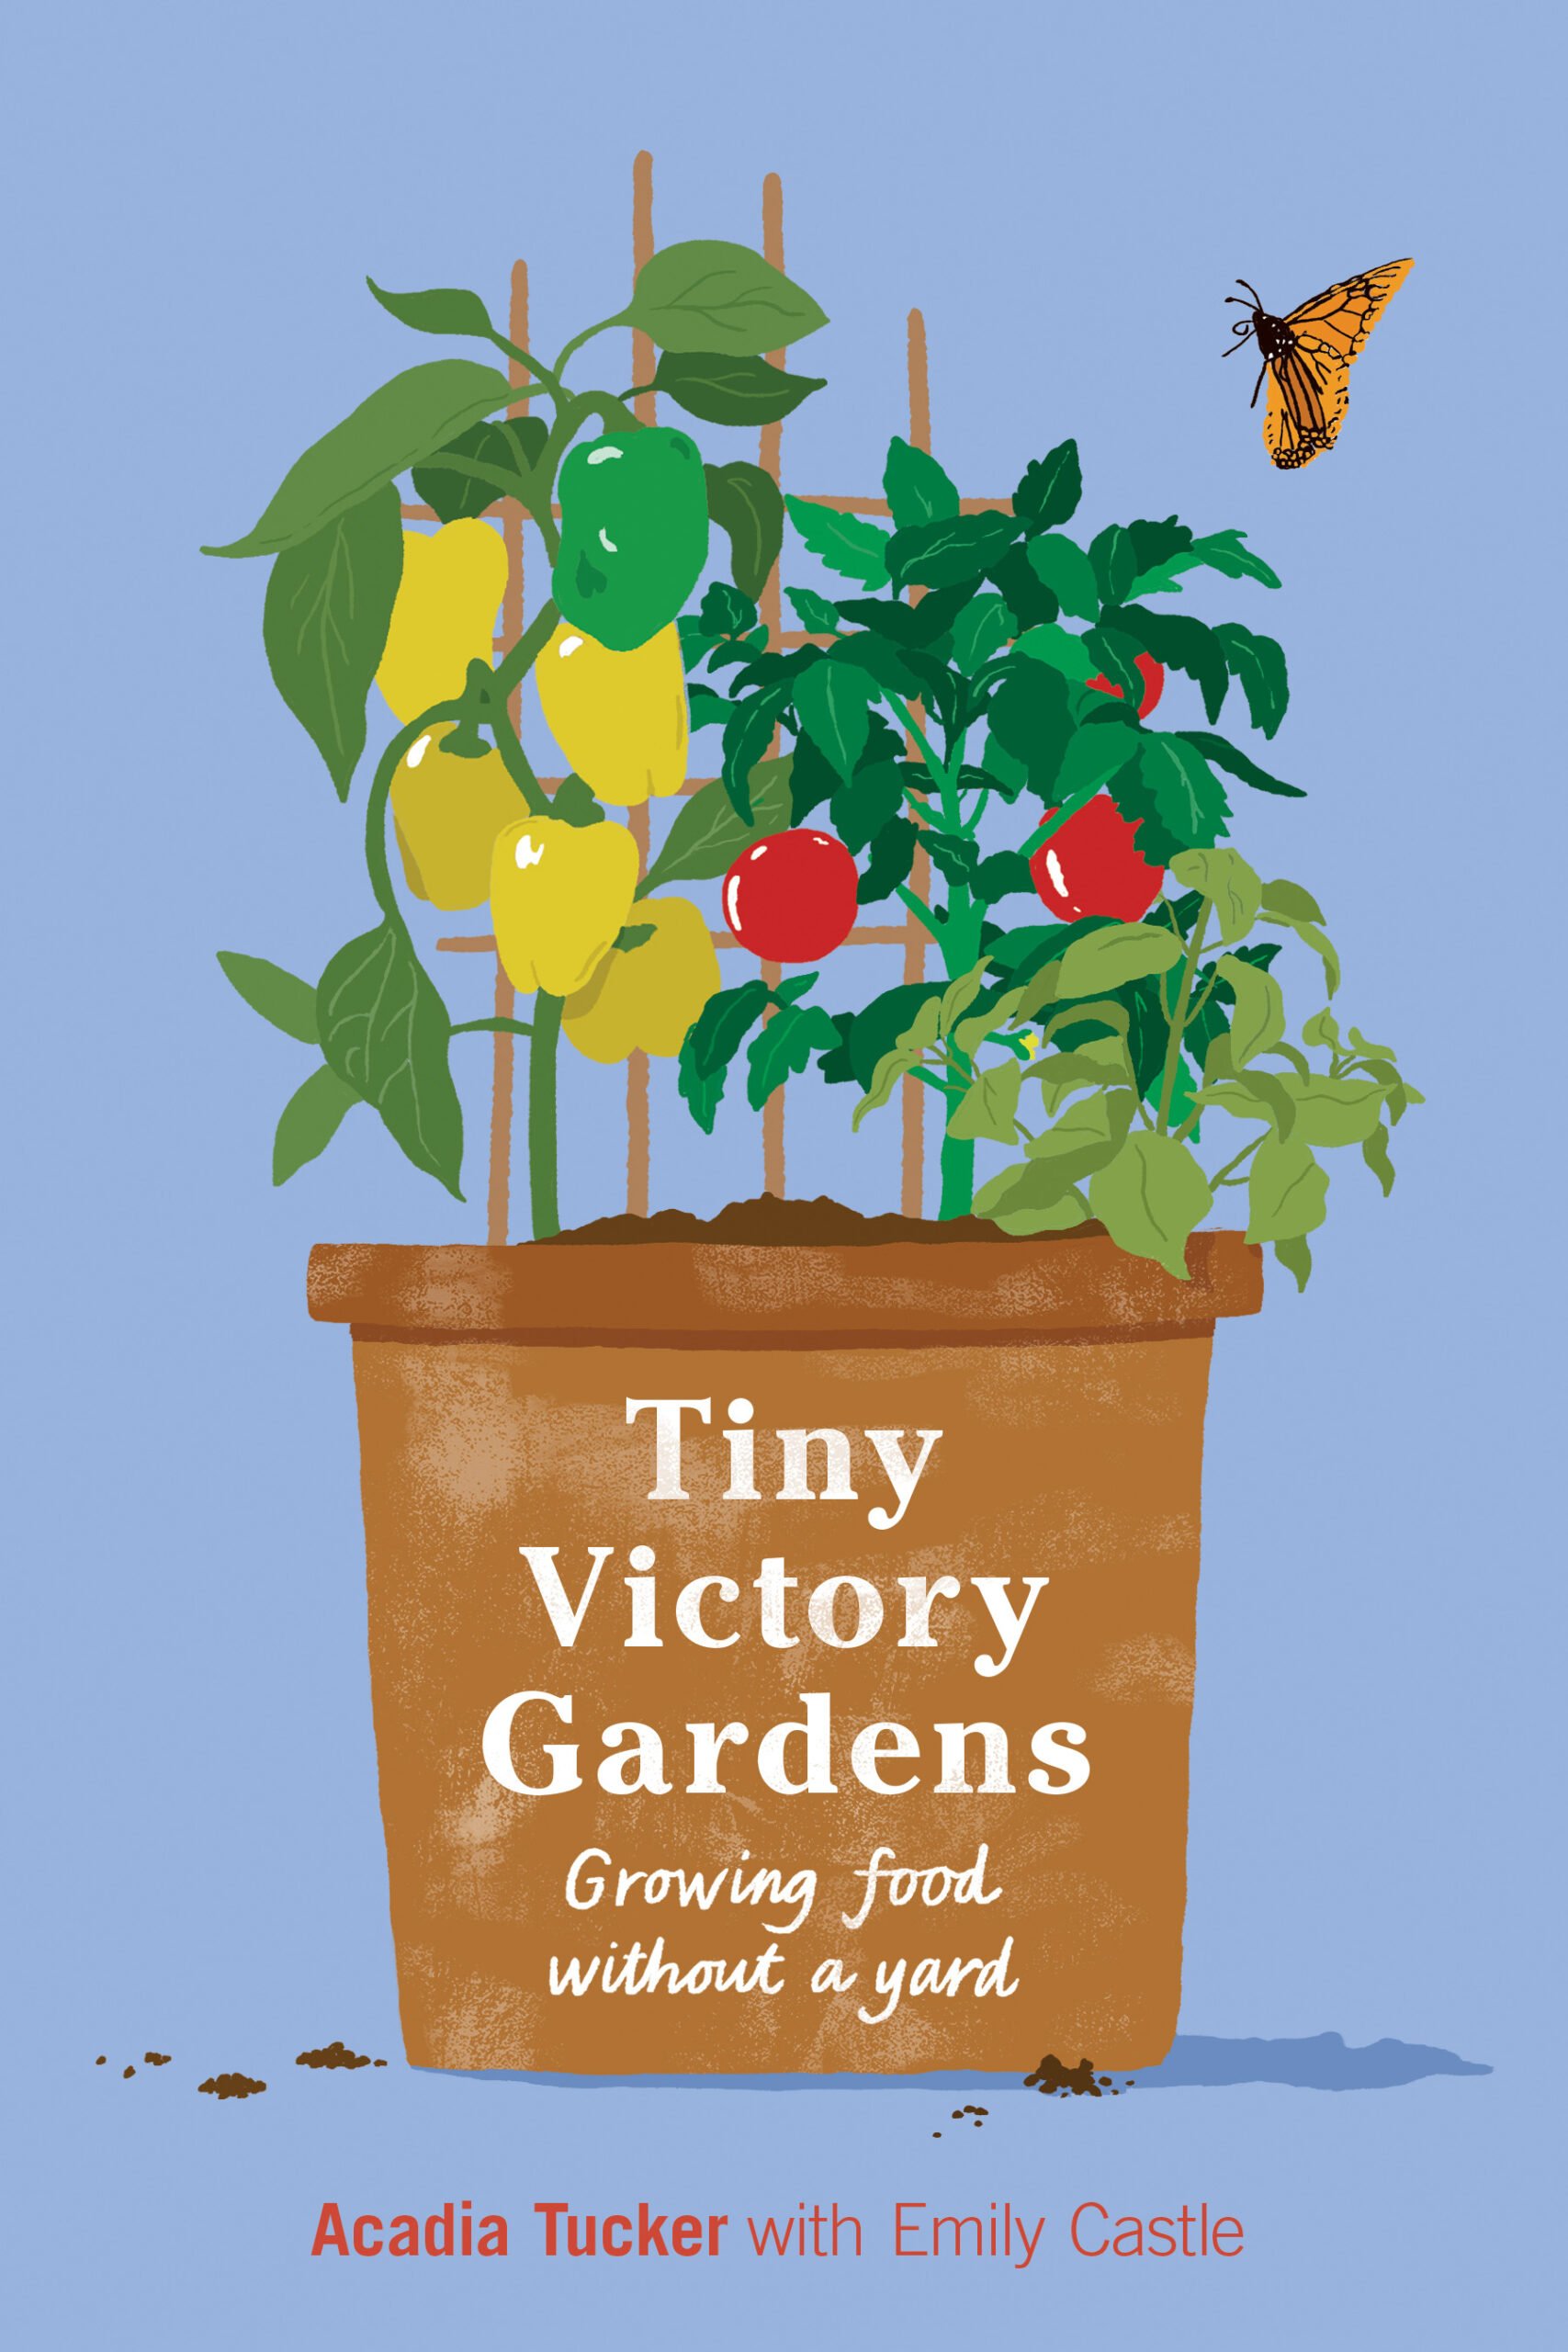 The Tiny Victory Gardens cover